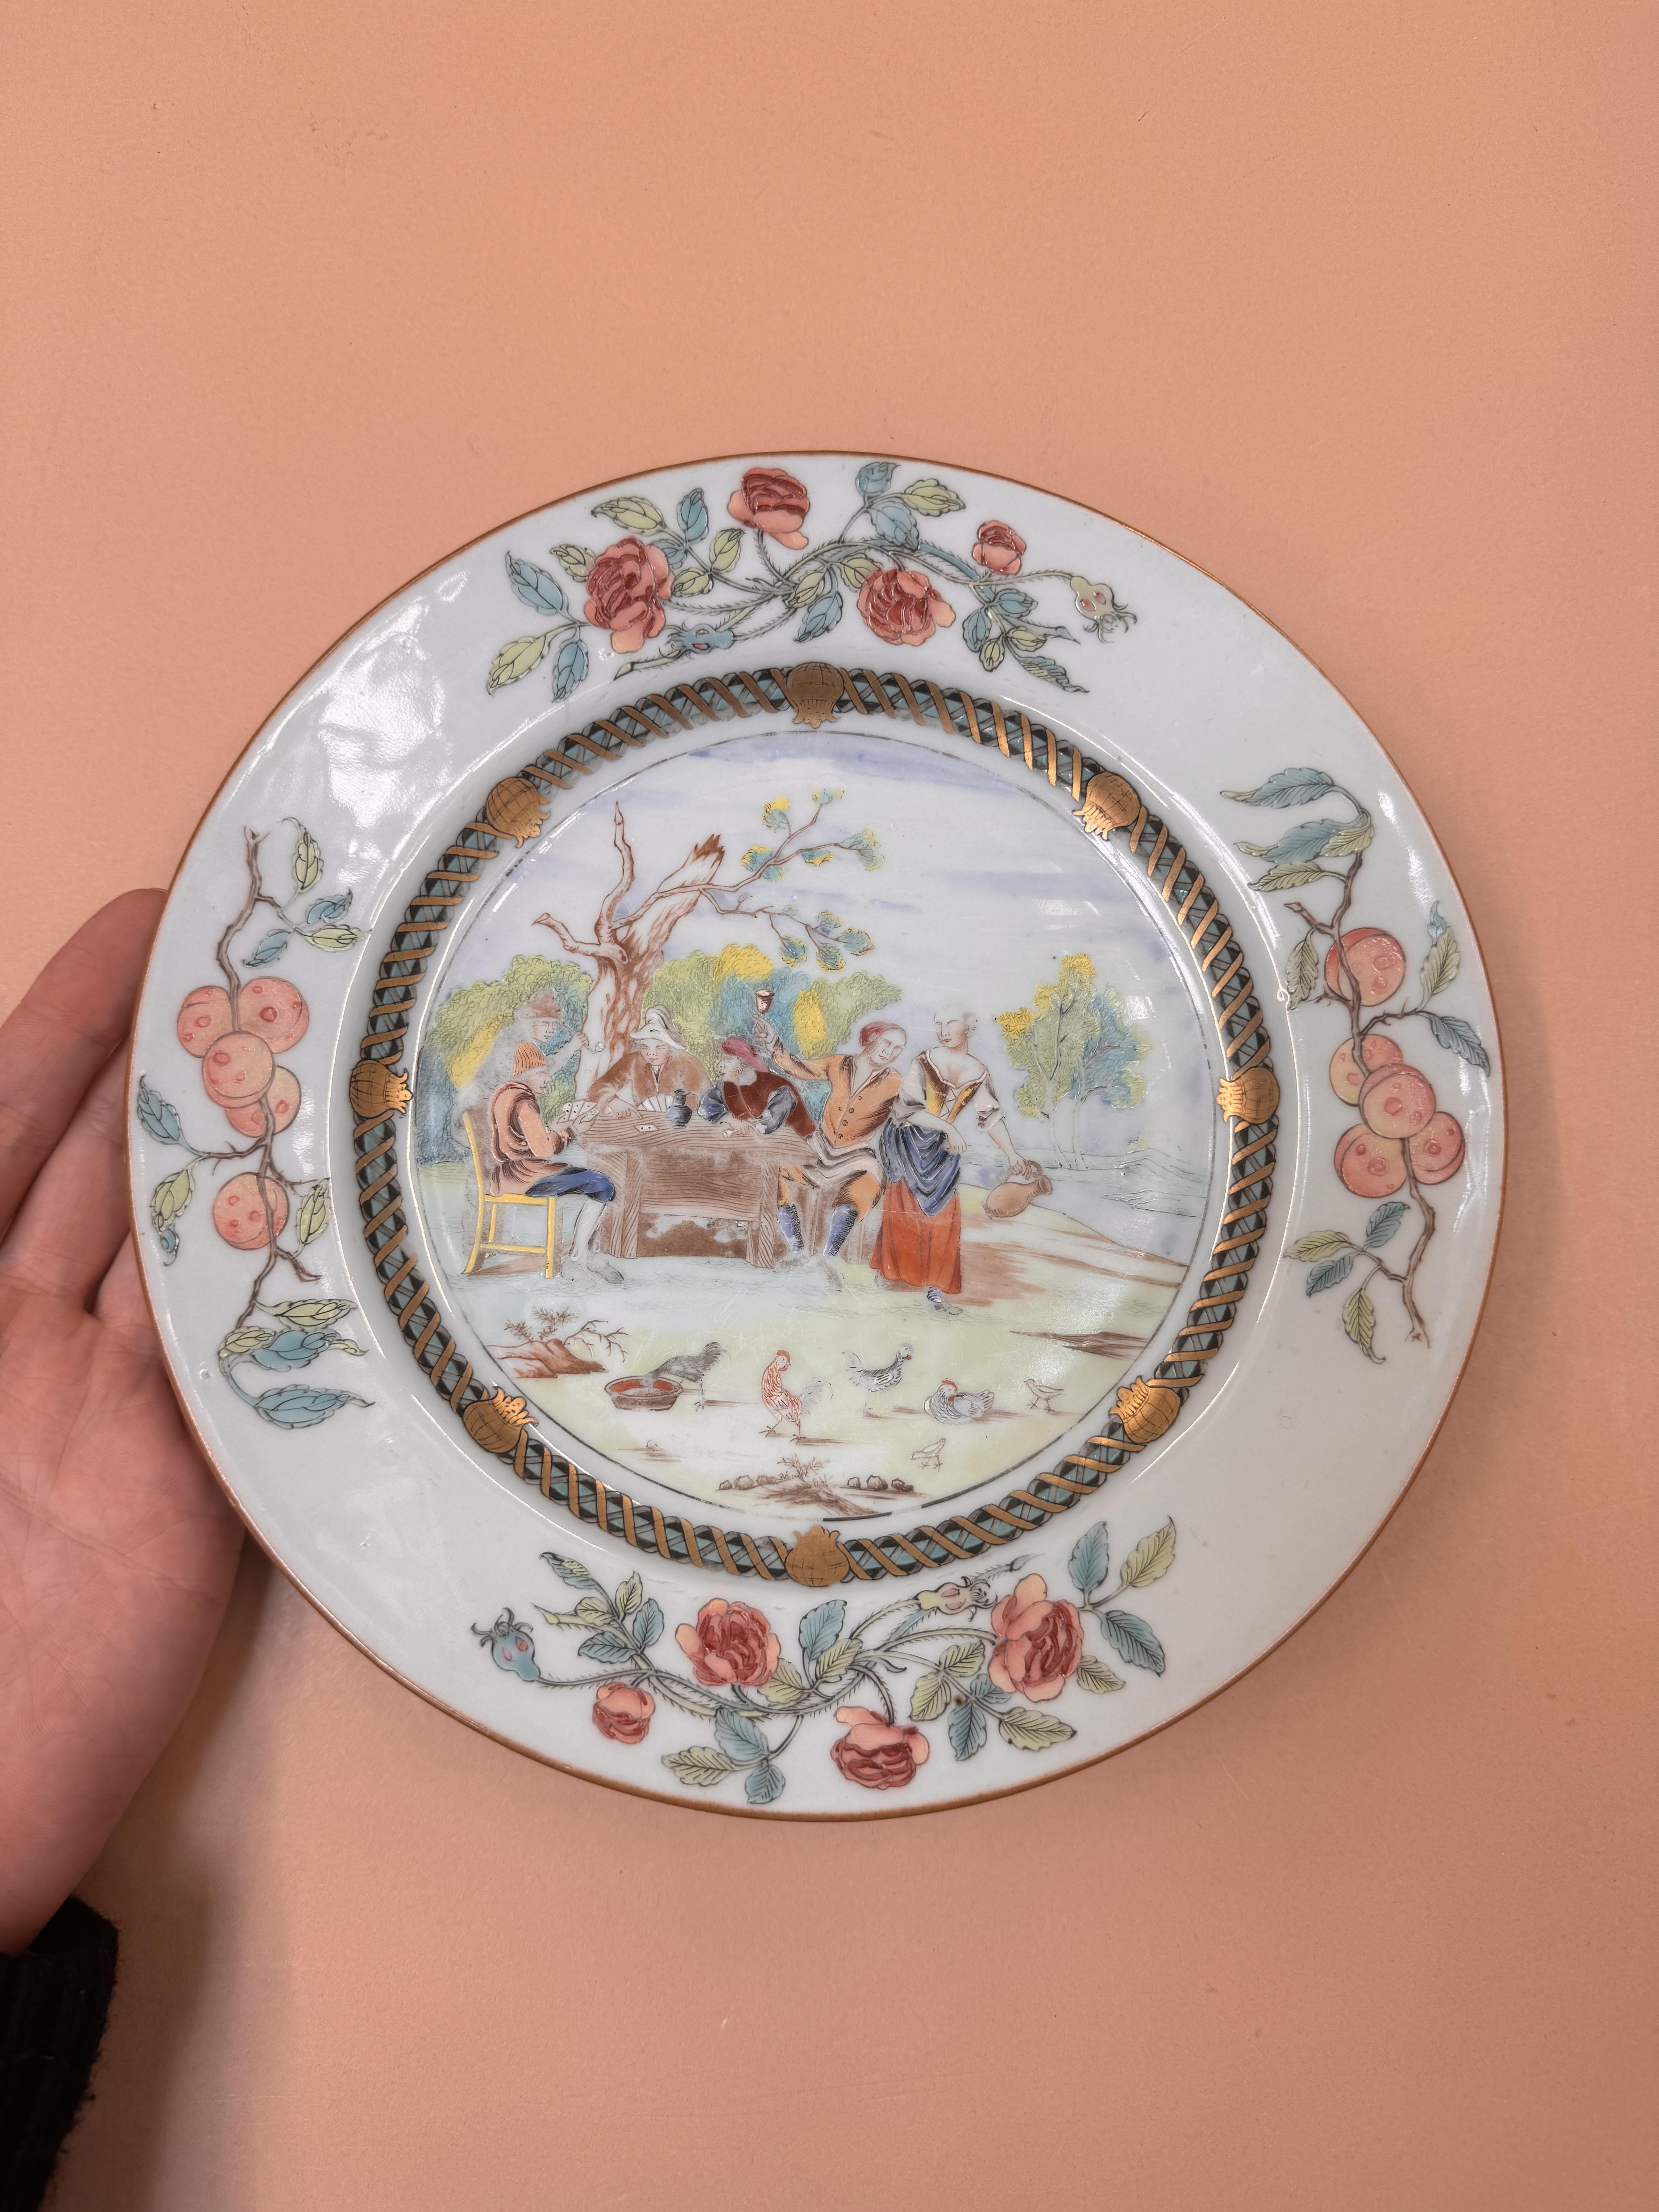 A CHINESE EXPORT FAMILLE ROSE 'CARD PLAYERS' DISH AFTER DAVID TENIERS 清乾隆 十八世紀 約 1740年 外銷粉彩繪西洋人物故事圖紋 - Image 13 of 17